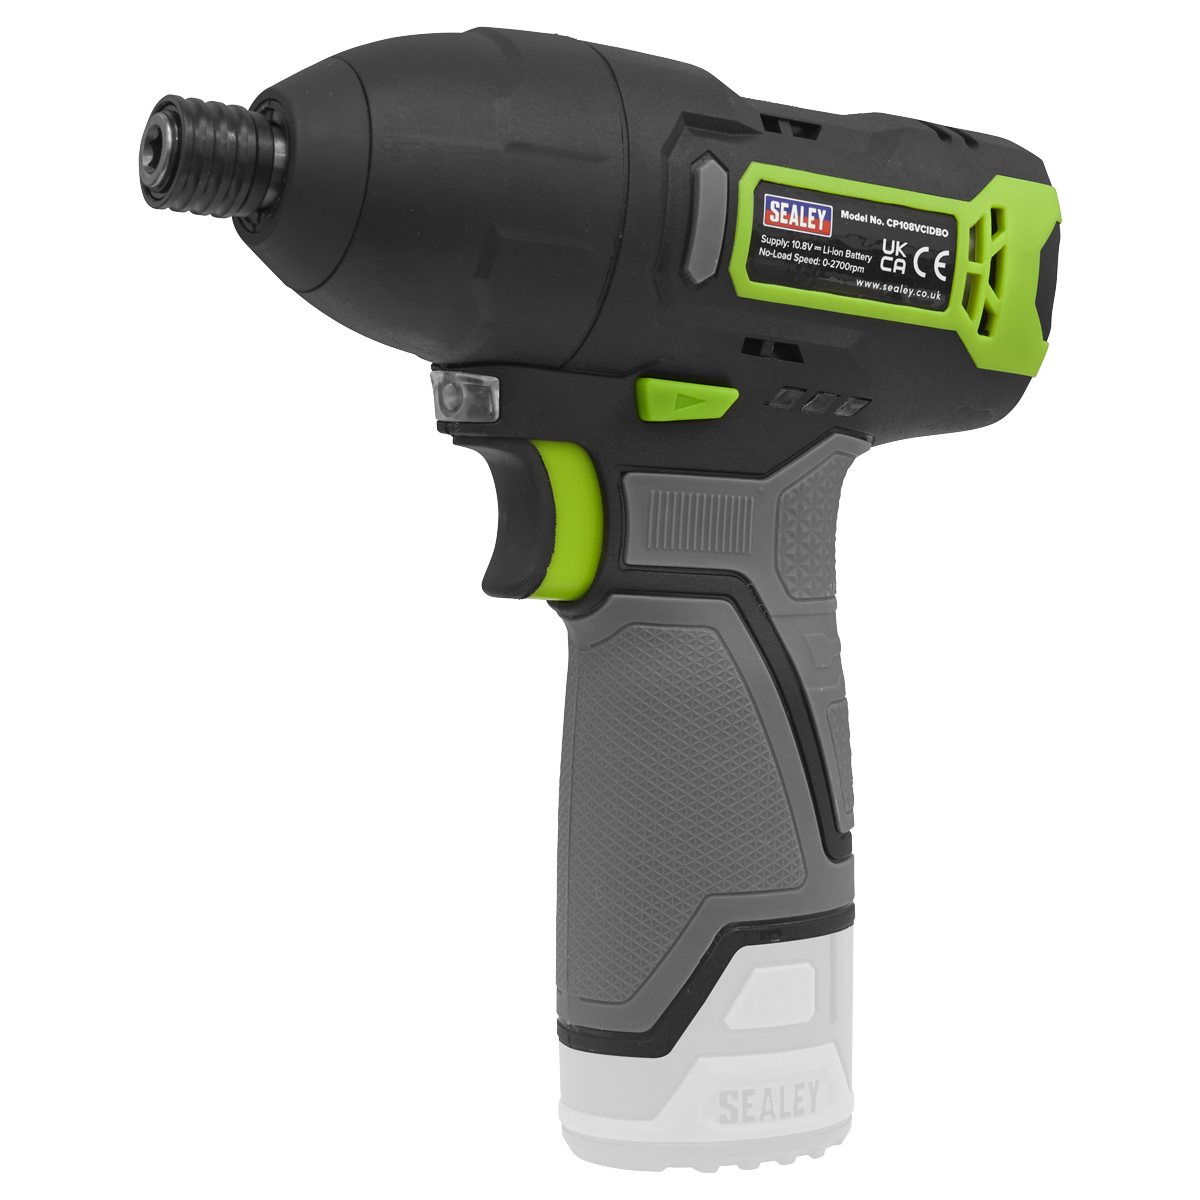 CP108VCIDBO - Cordless Impact Driver 1/4”Hex Drive 10.8V - Body Only